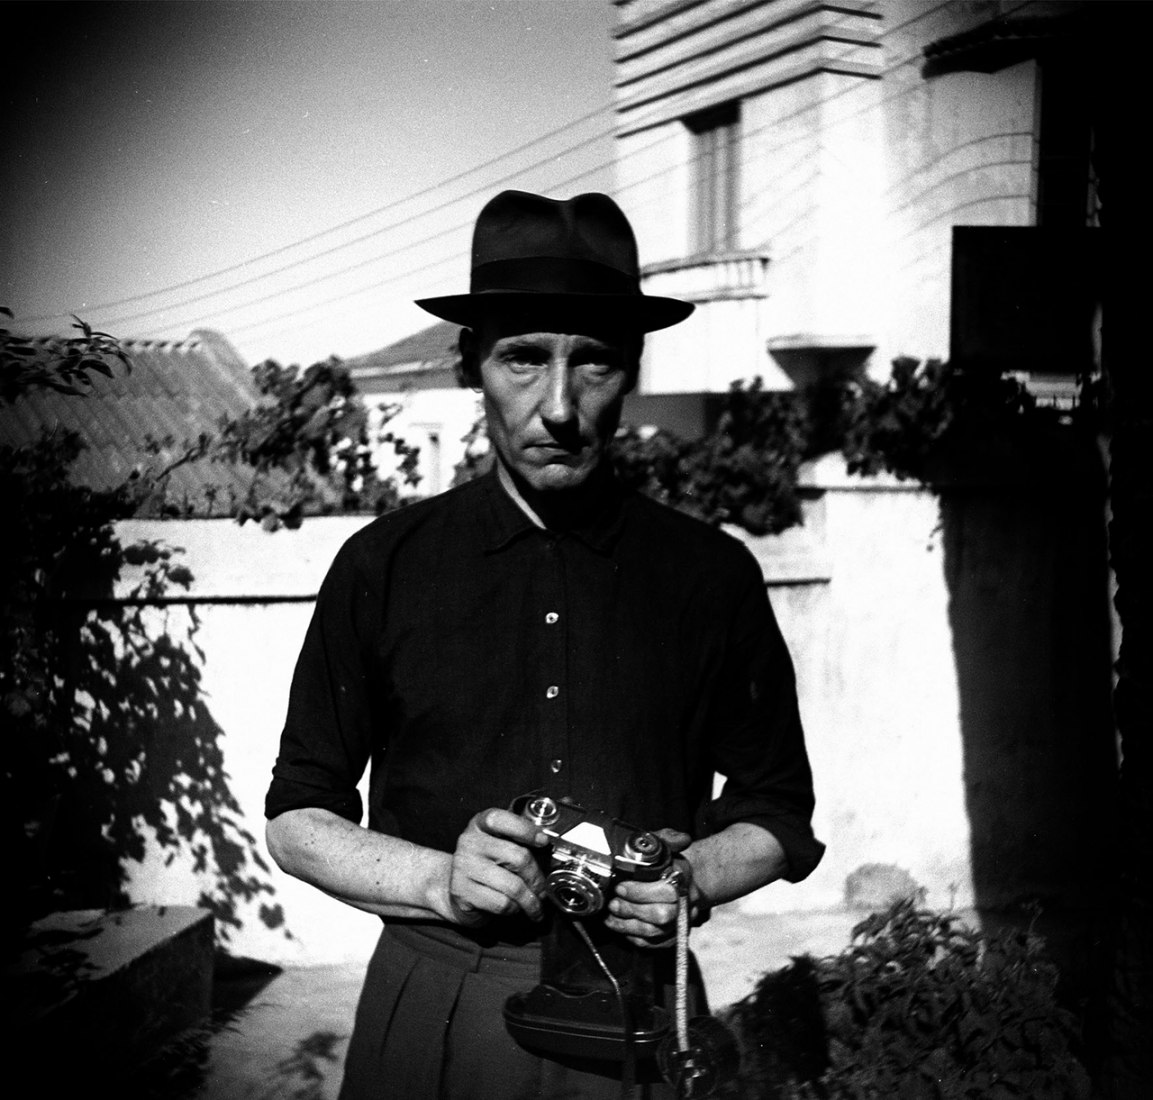 Burroughs at the Hotel Villa Mourniria Garden, unknown photographer, scanning the negative, 5.6 x 5.8 cm. Photography © Estate of William S. Burroughs.